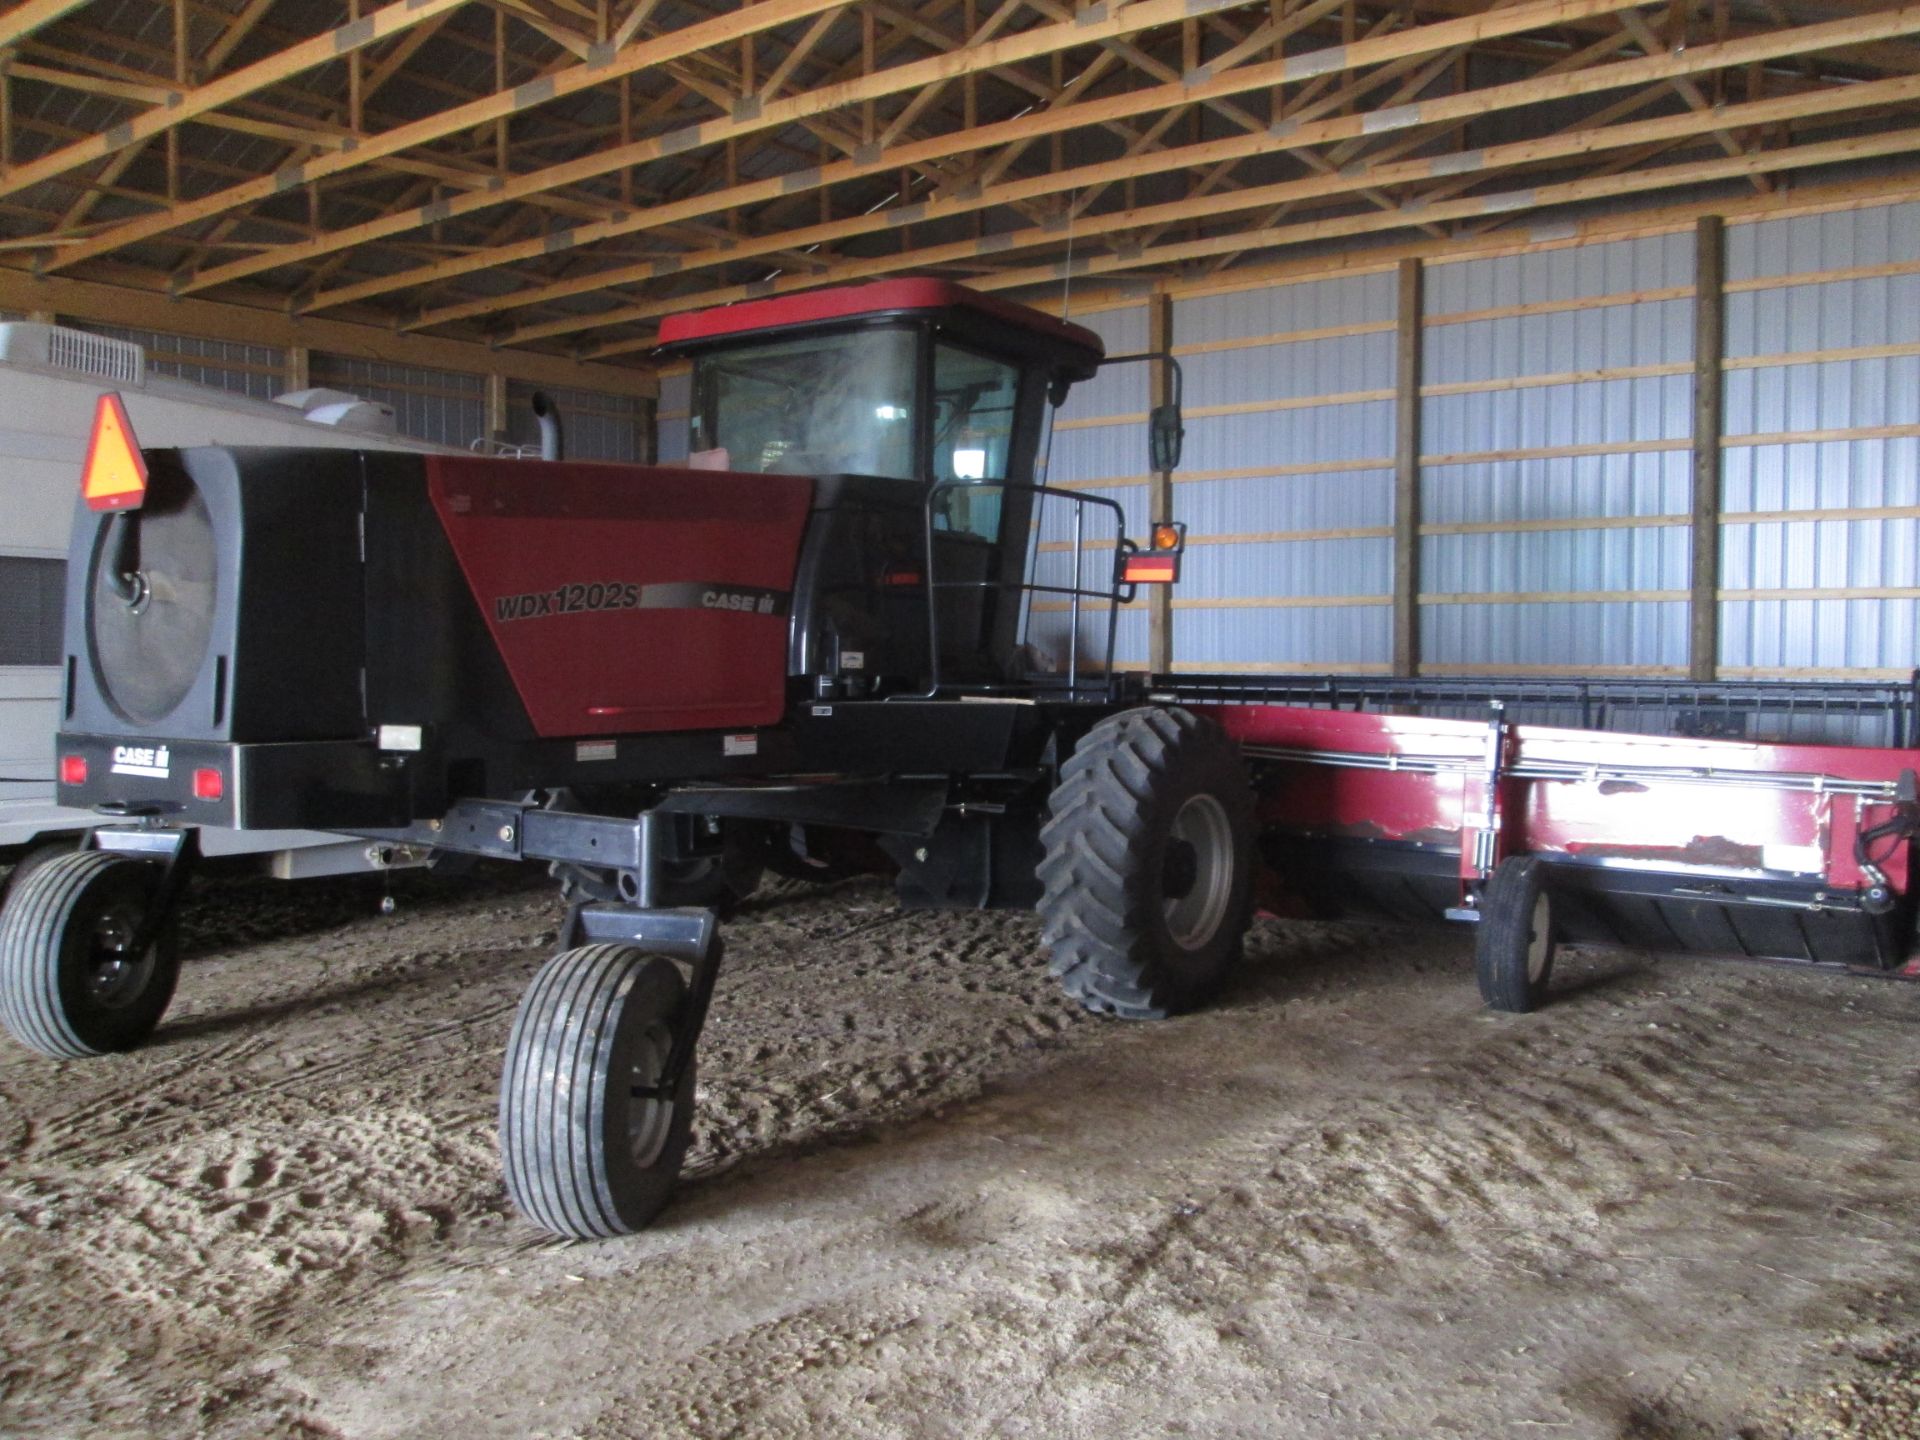 Case WDX 1202 S swather (2005), c/w 30' DHX 302 header (2007), showing 795 eng hr, dbl knife - Image 6 of 32